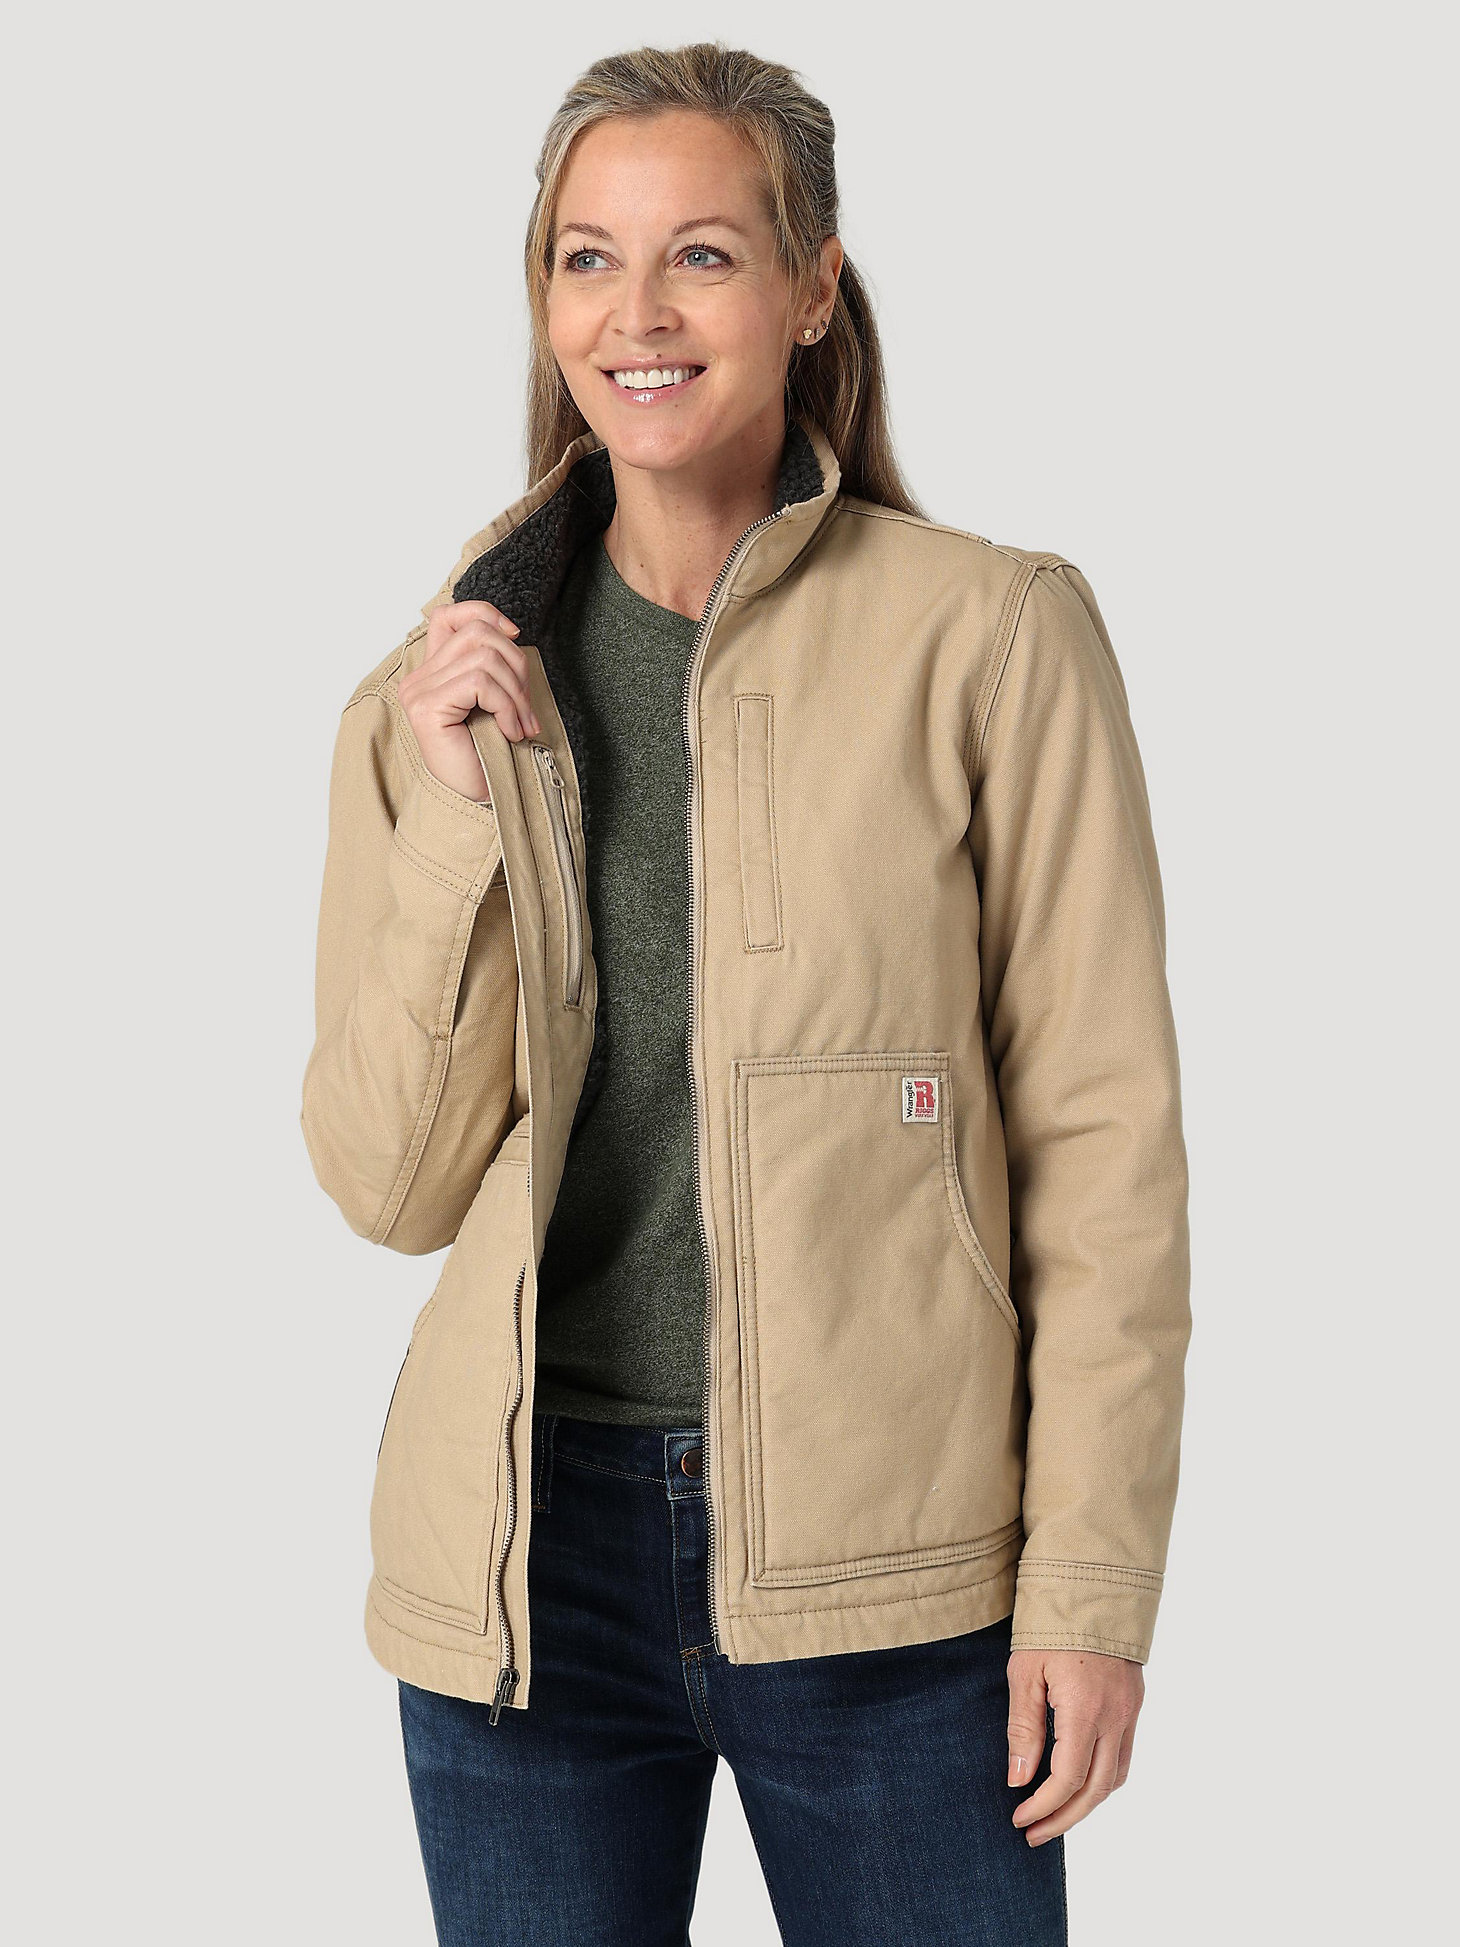 Womens RIGGS Tough Layers Sherpa Lined Canvas Jacket in Golden Khaki alternative view 3